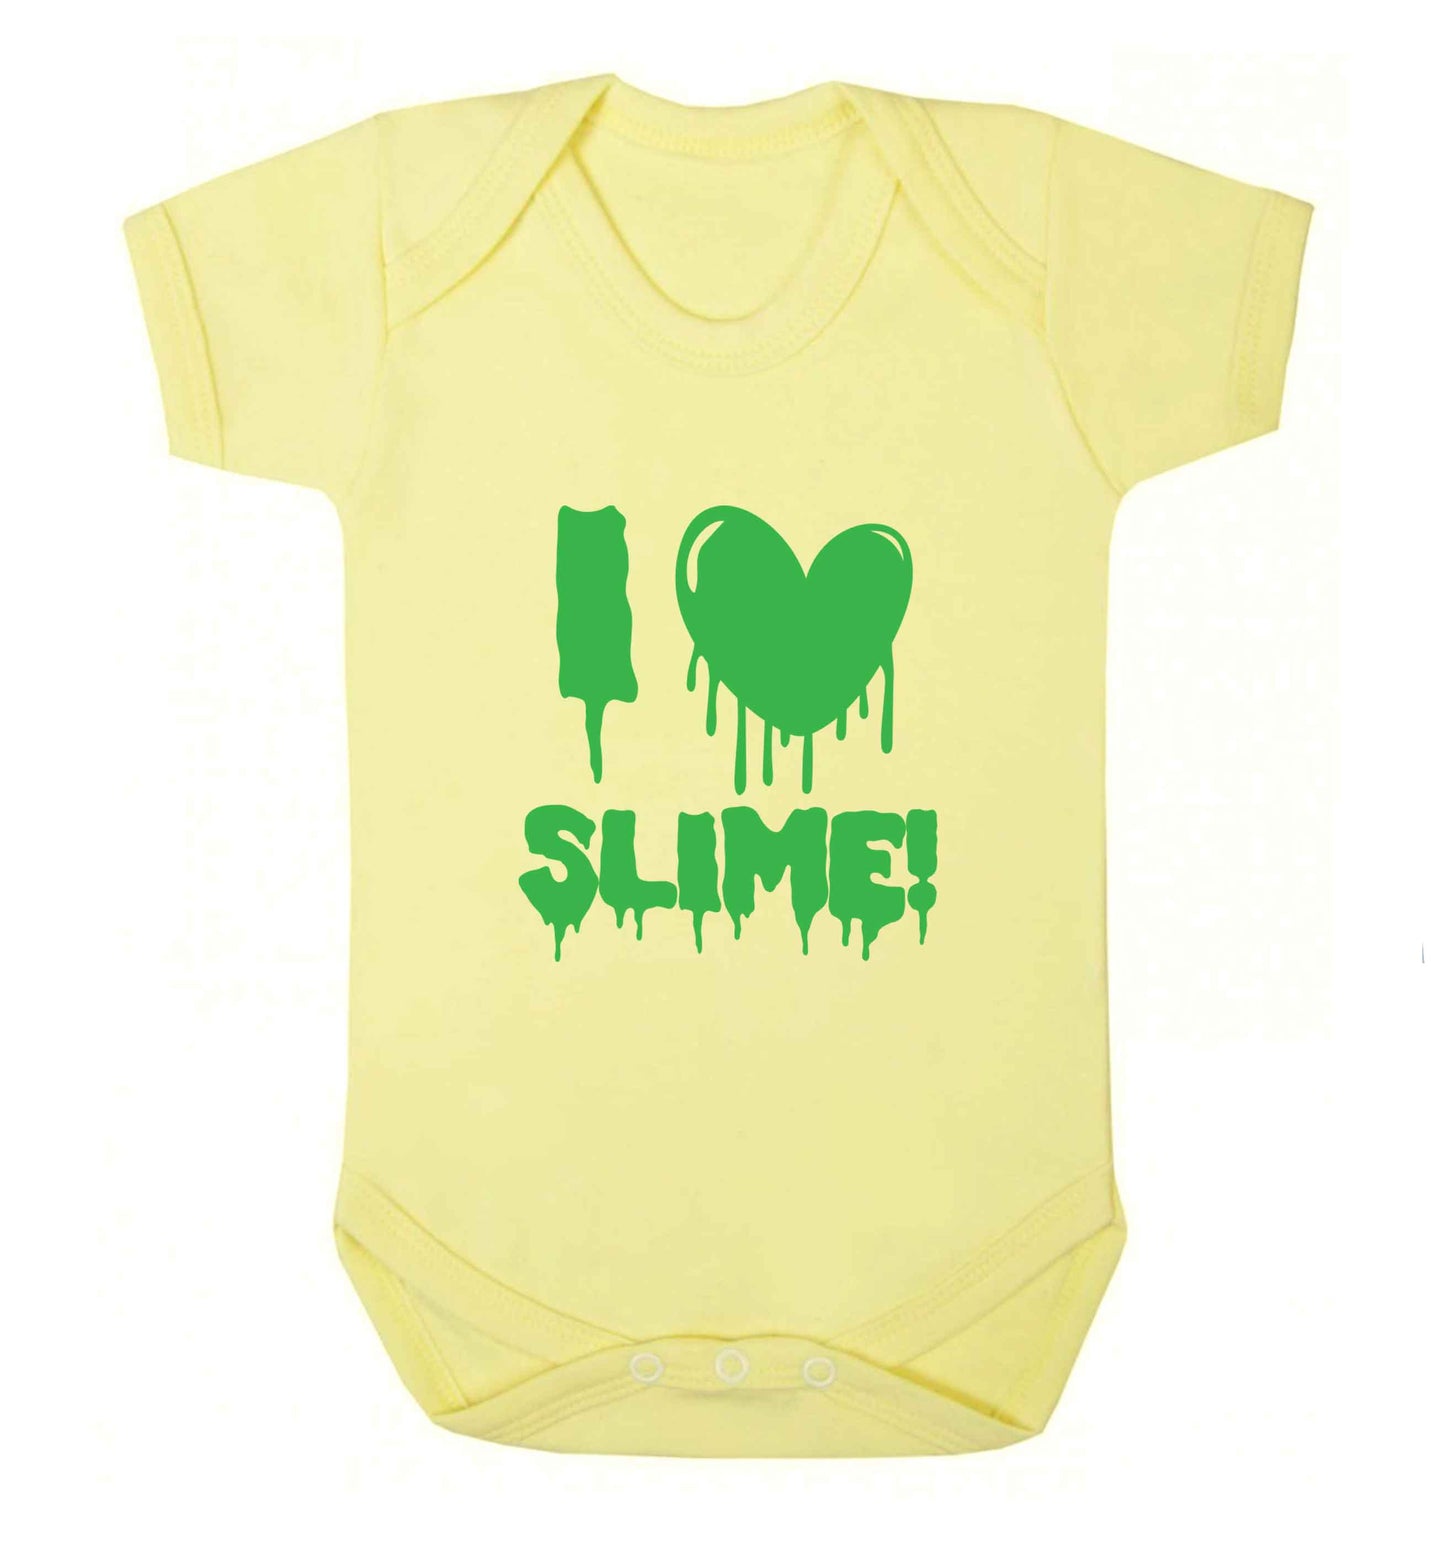 Neon green I love slime baby vest pale yellow 18-24 months